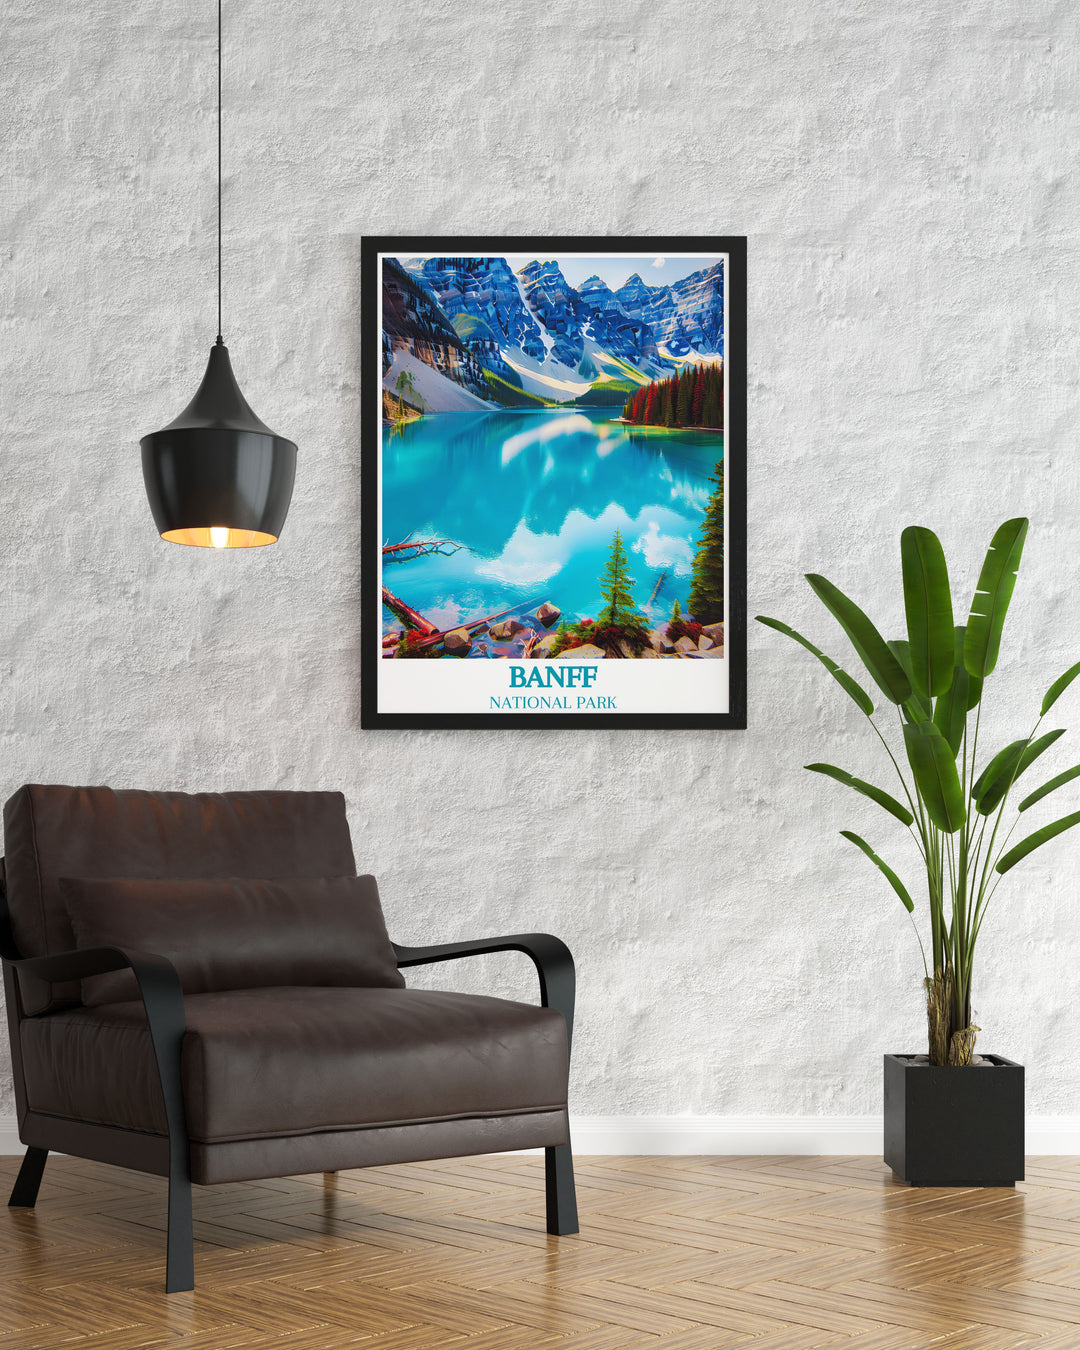 Canadian landscape poster highlighting the lush greenery and towering mountains of Banff, ideal for nature lovers and adventure seekers.